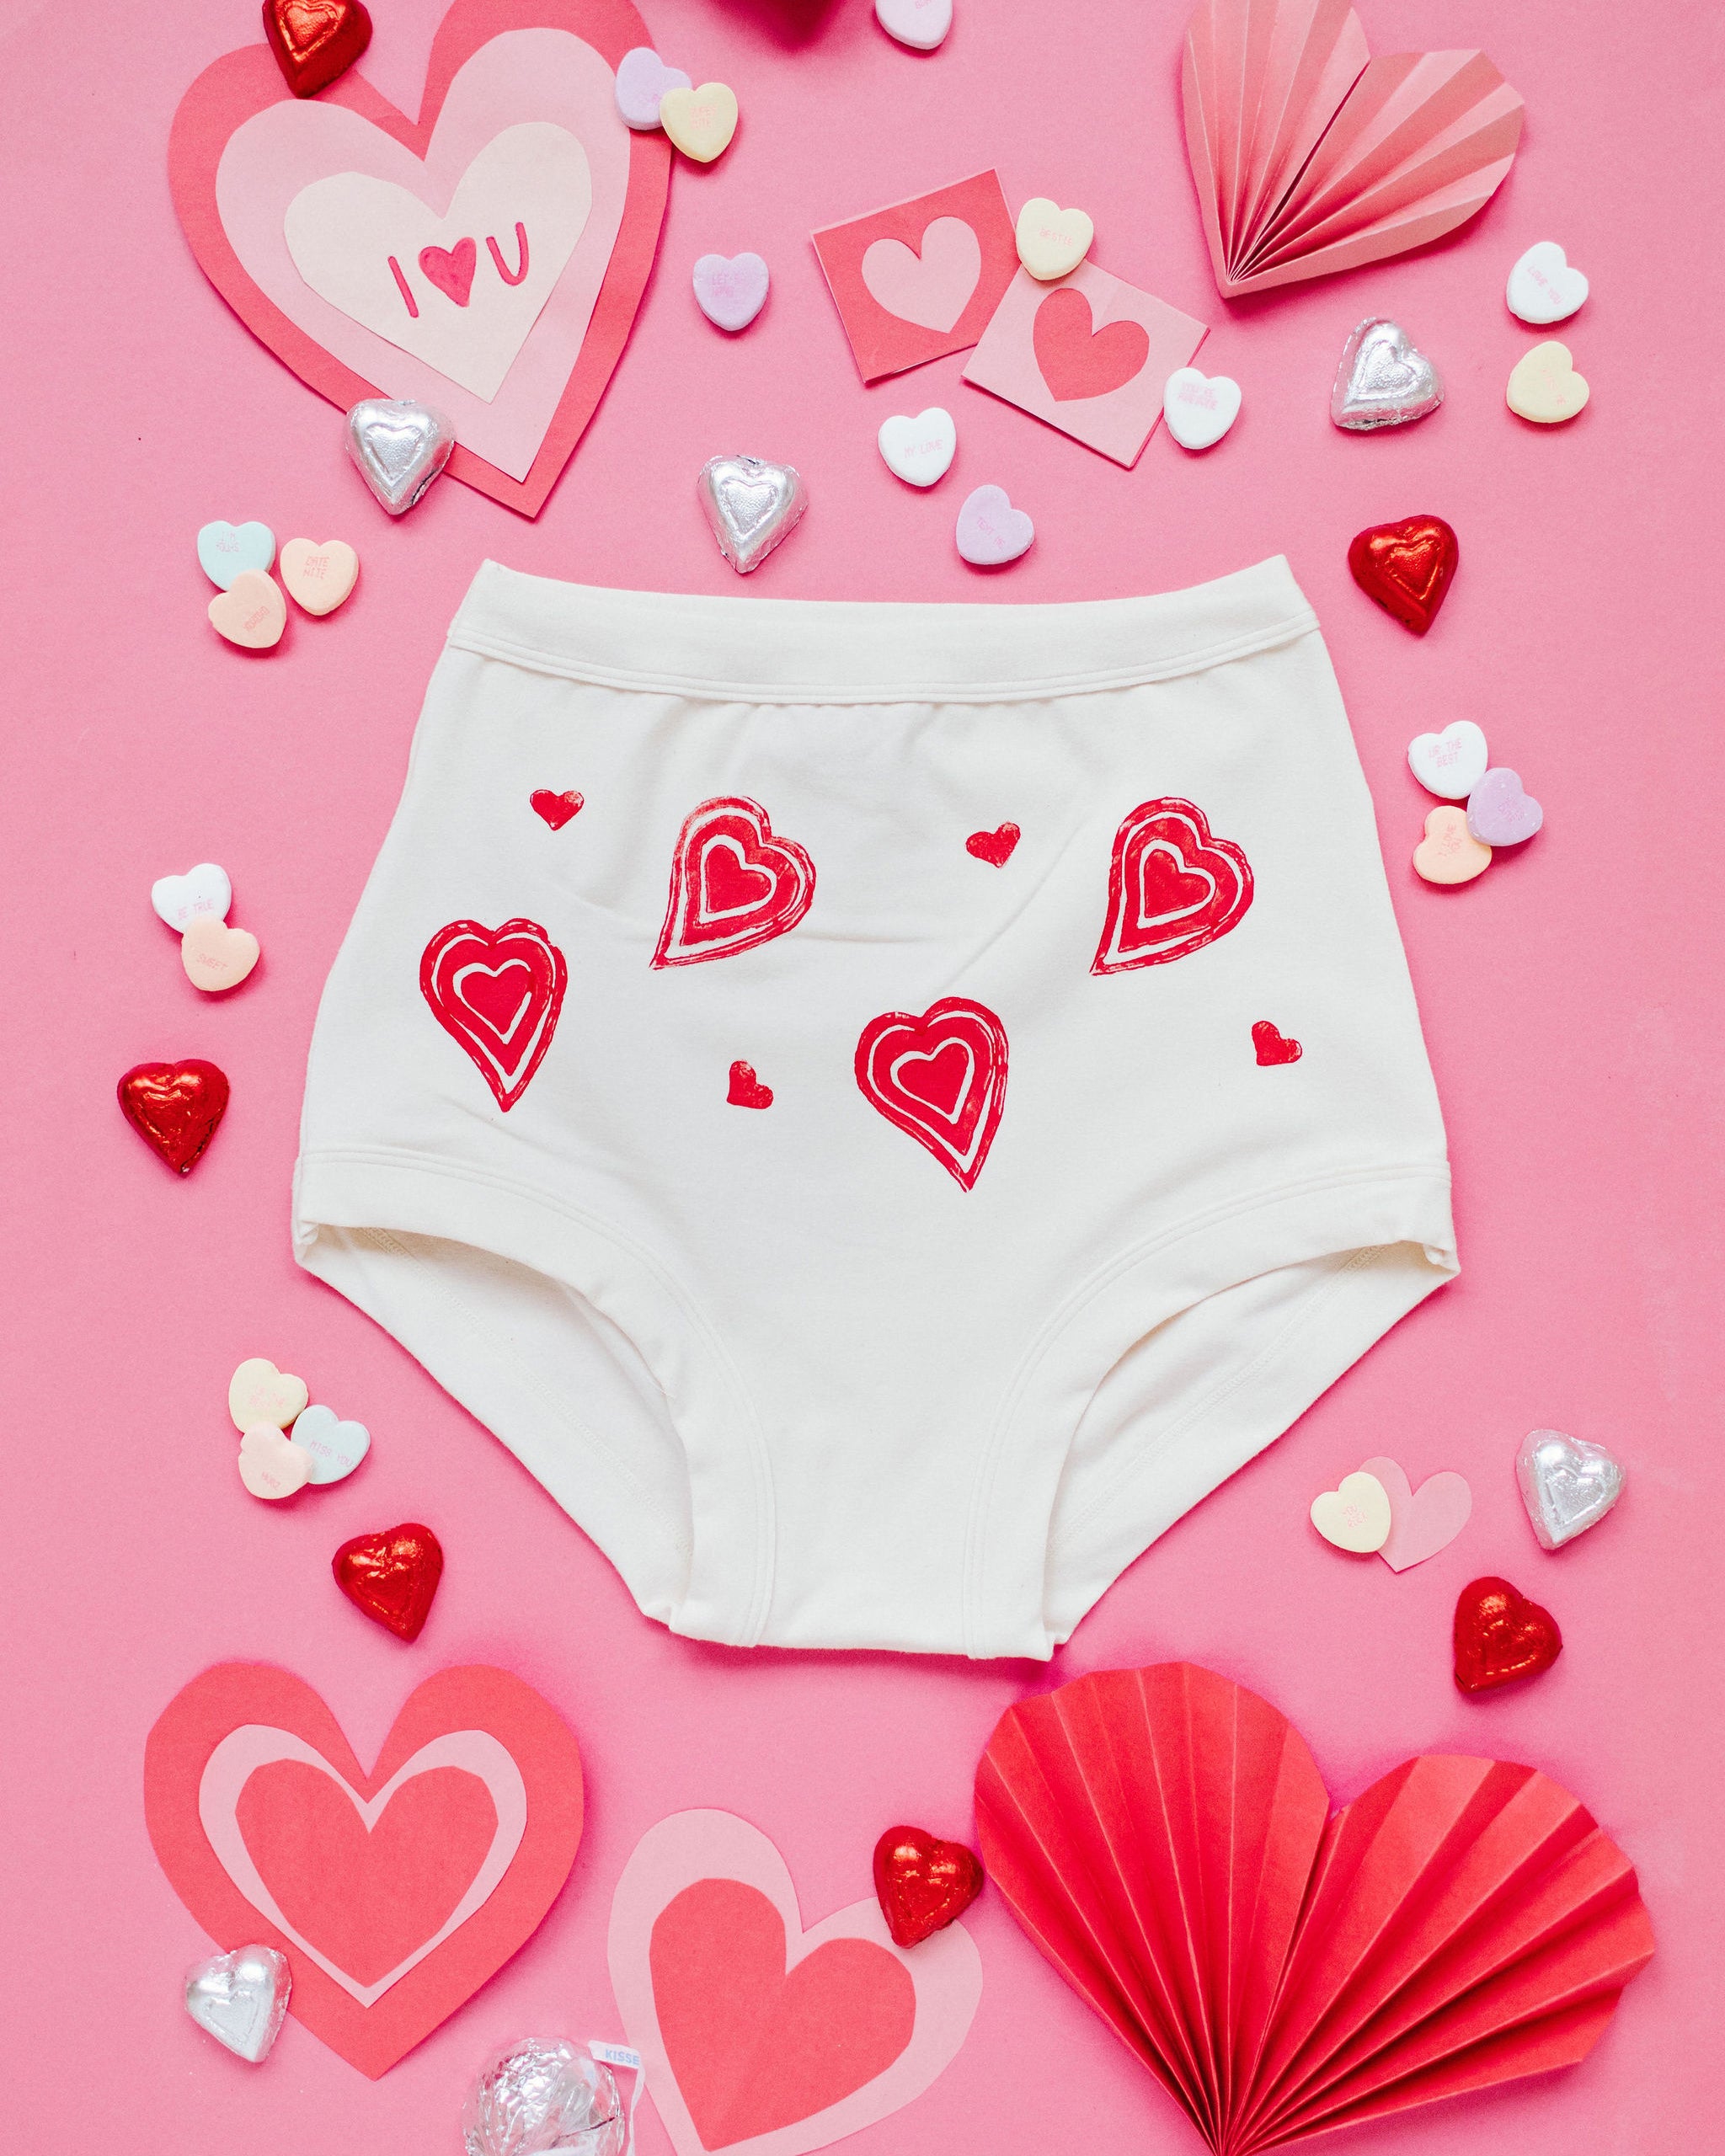 Flat lay of Thunderpants Sky Rise style underwear with hand printed red hearts on Vanilla.